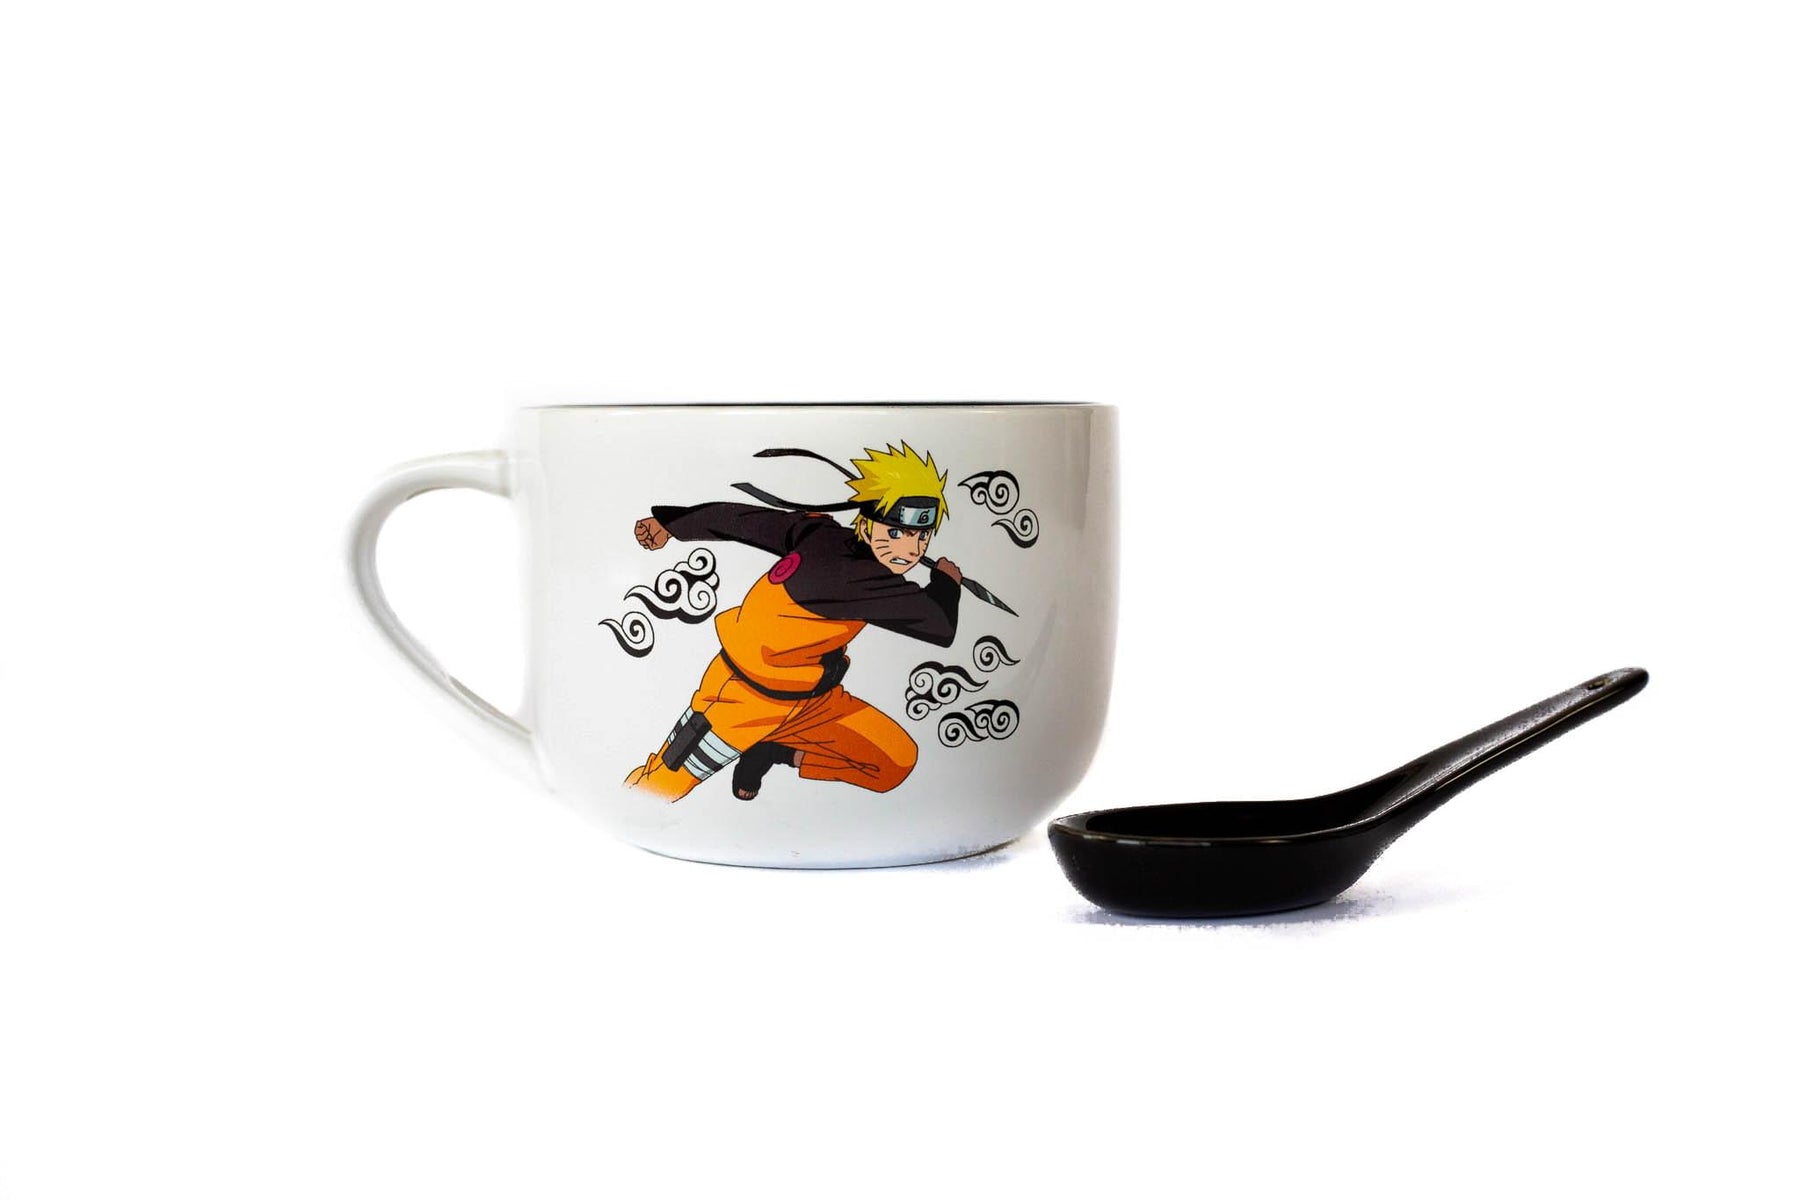 Naruto Anime Ceramic Ramen Soup Mug with Spoon - Awesome 20 oz Coffee Cup for Office